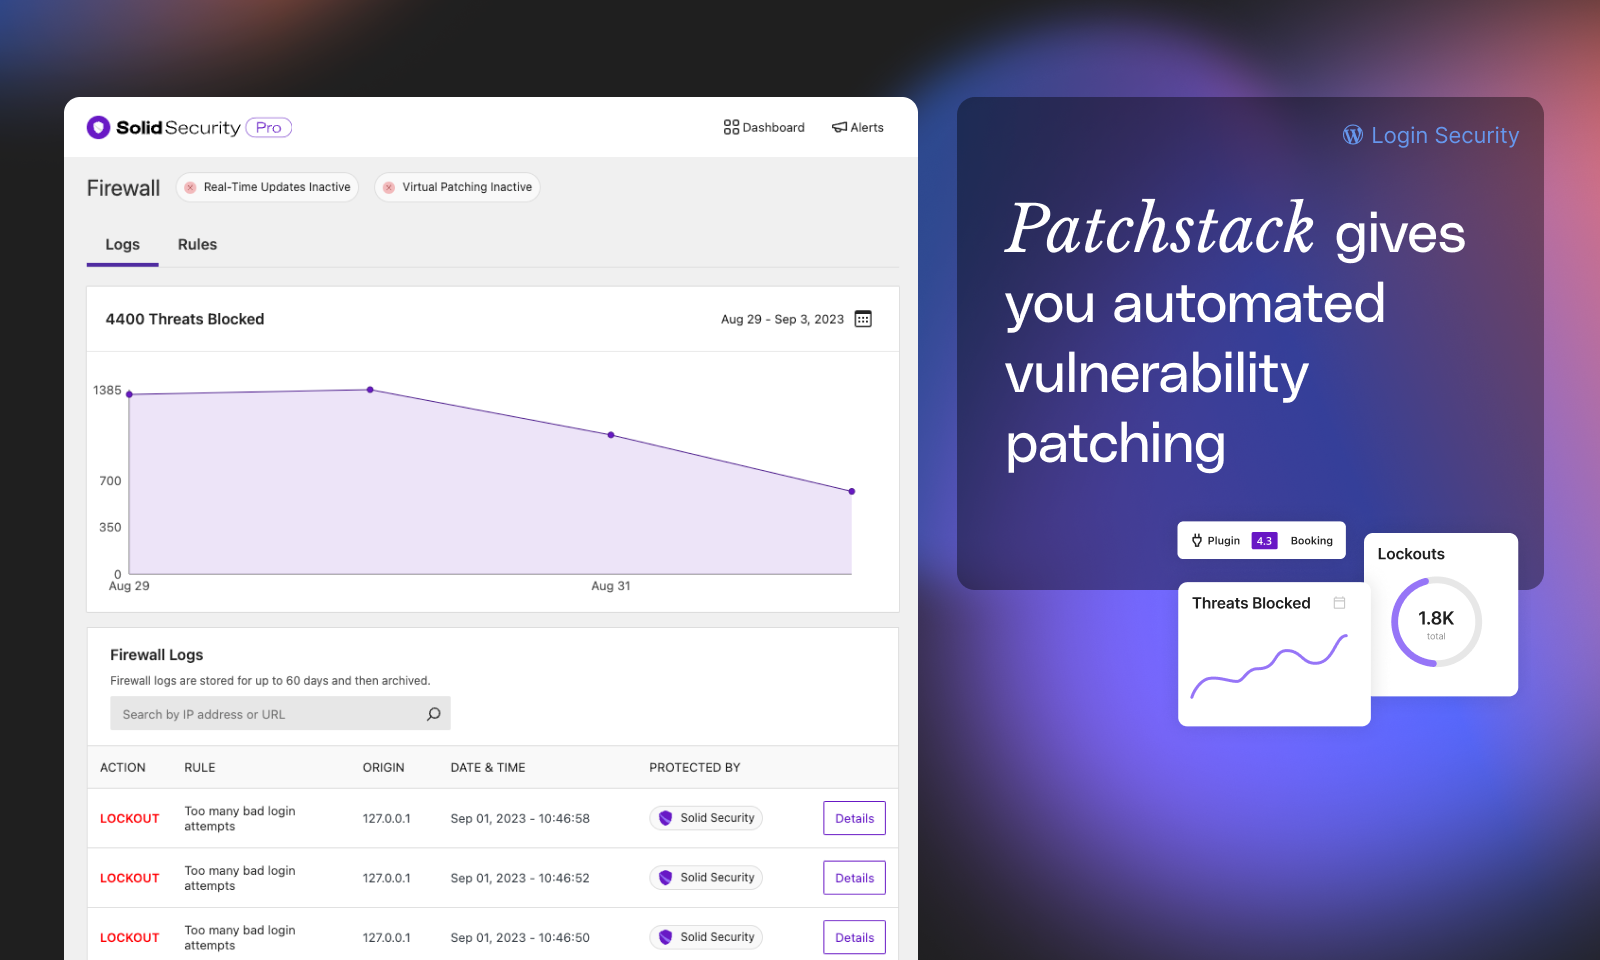 Automated vulnerability patching with Patchstack (Pro)